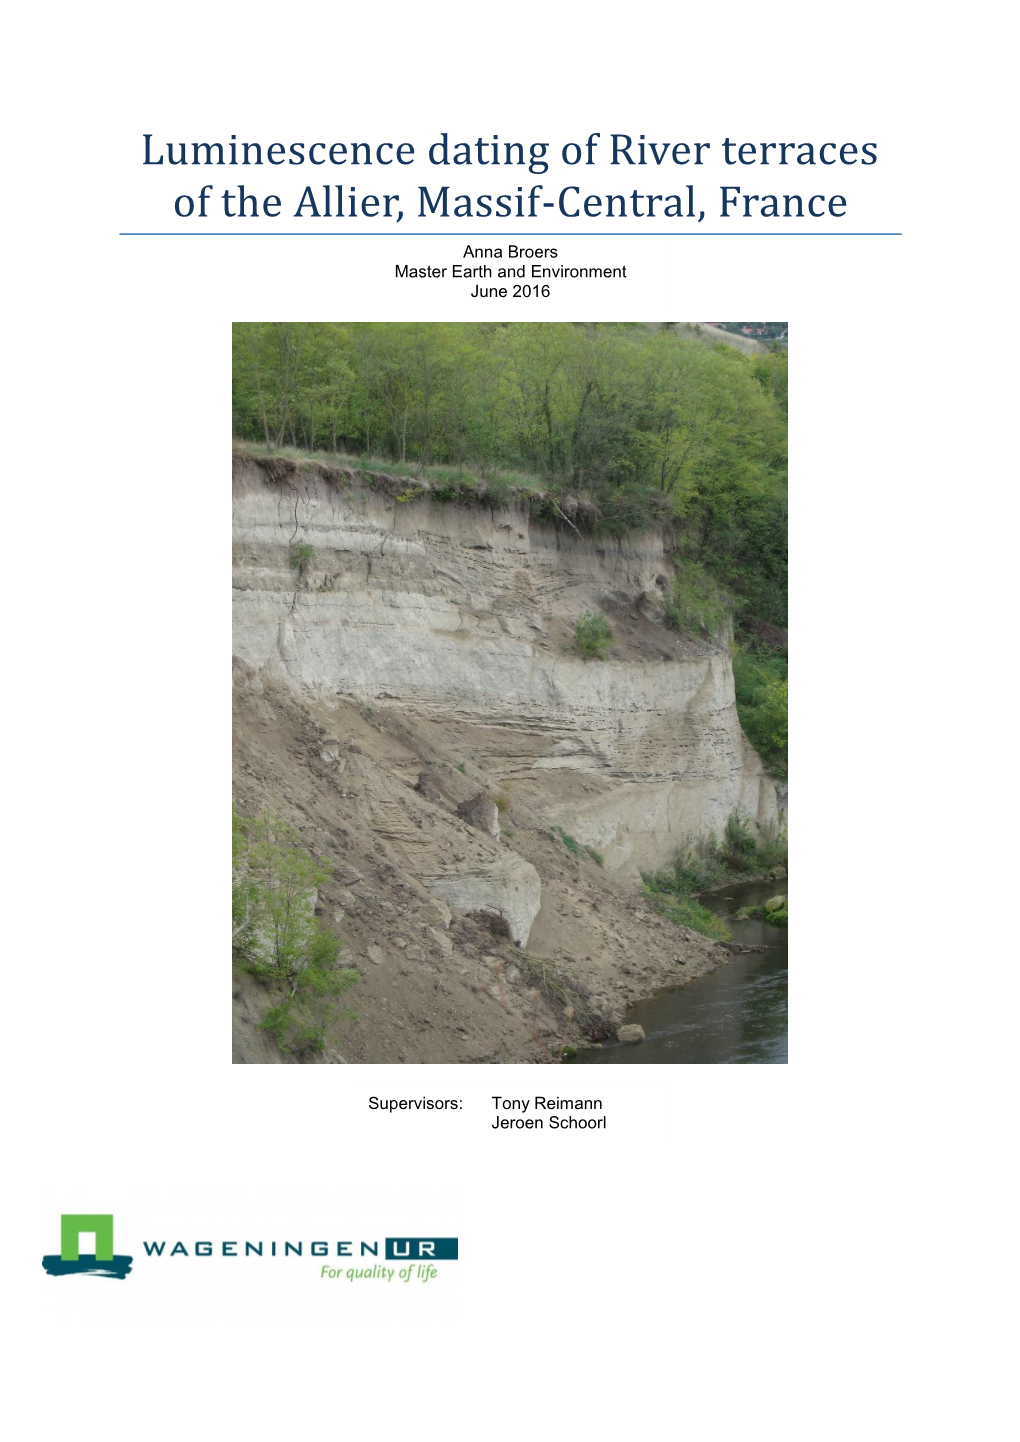 Luminescence Dating of River Terraces of the Allier, Massif-Central, France